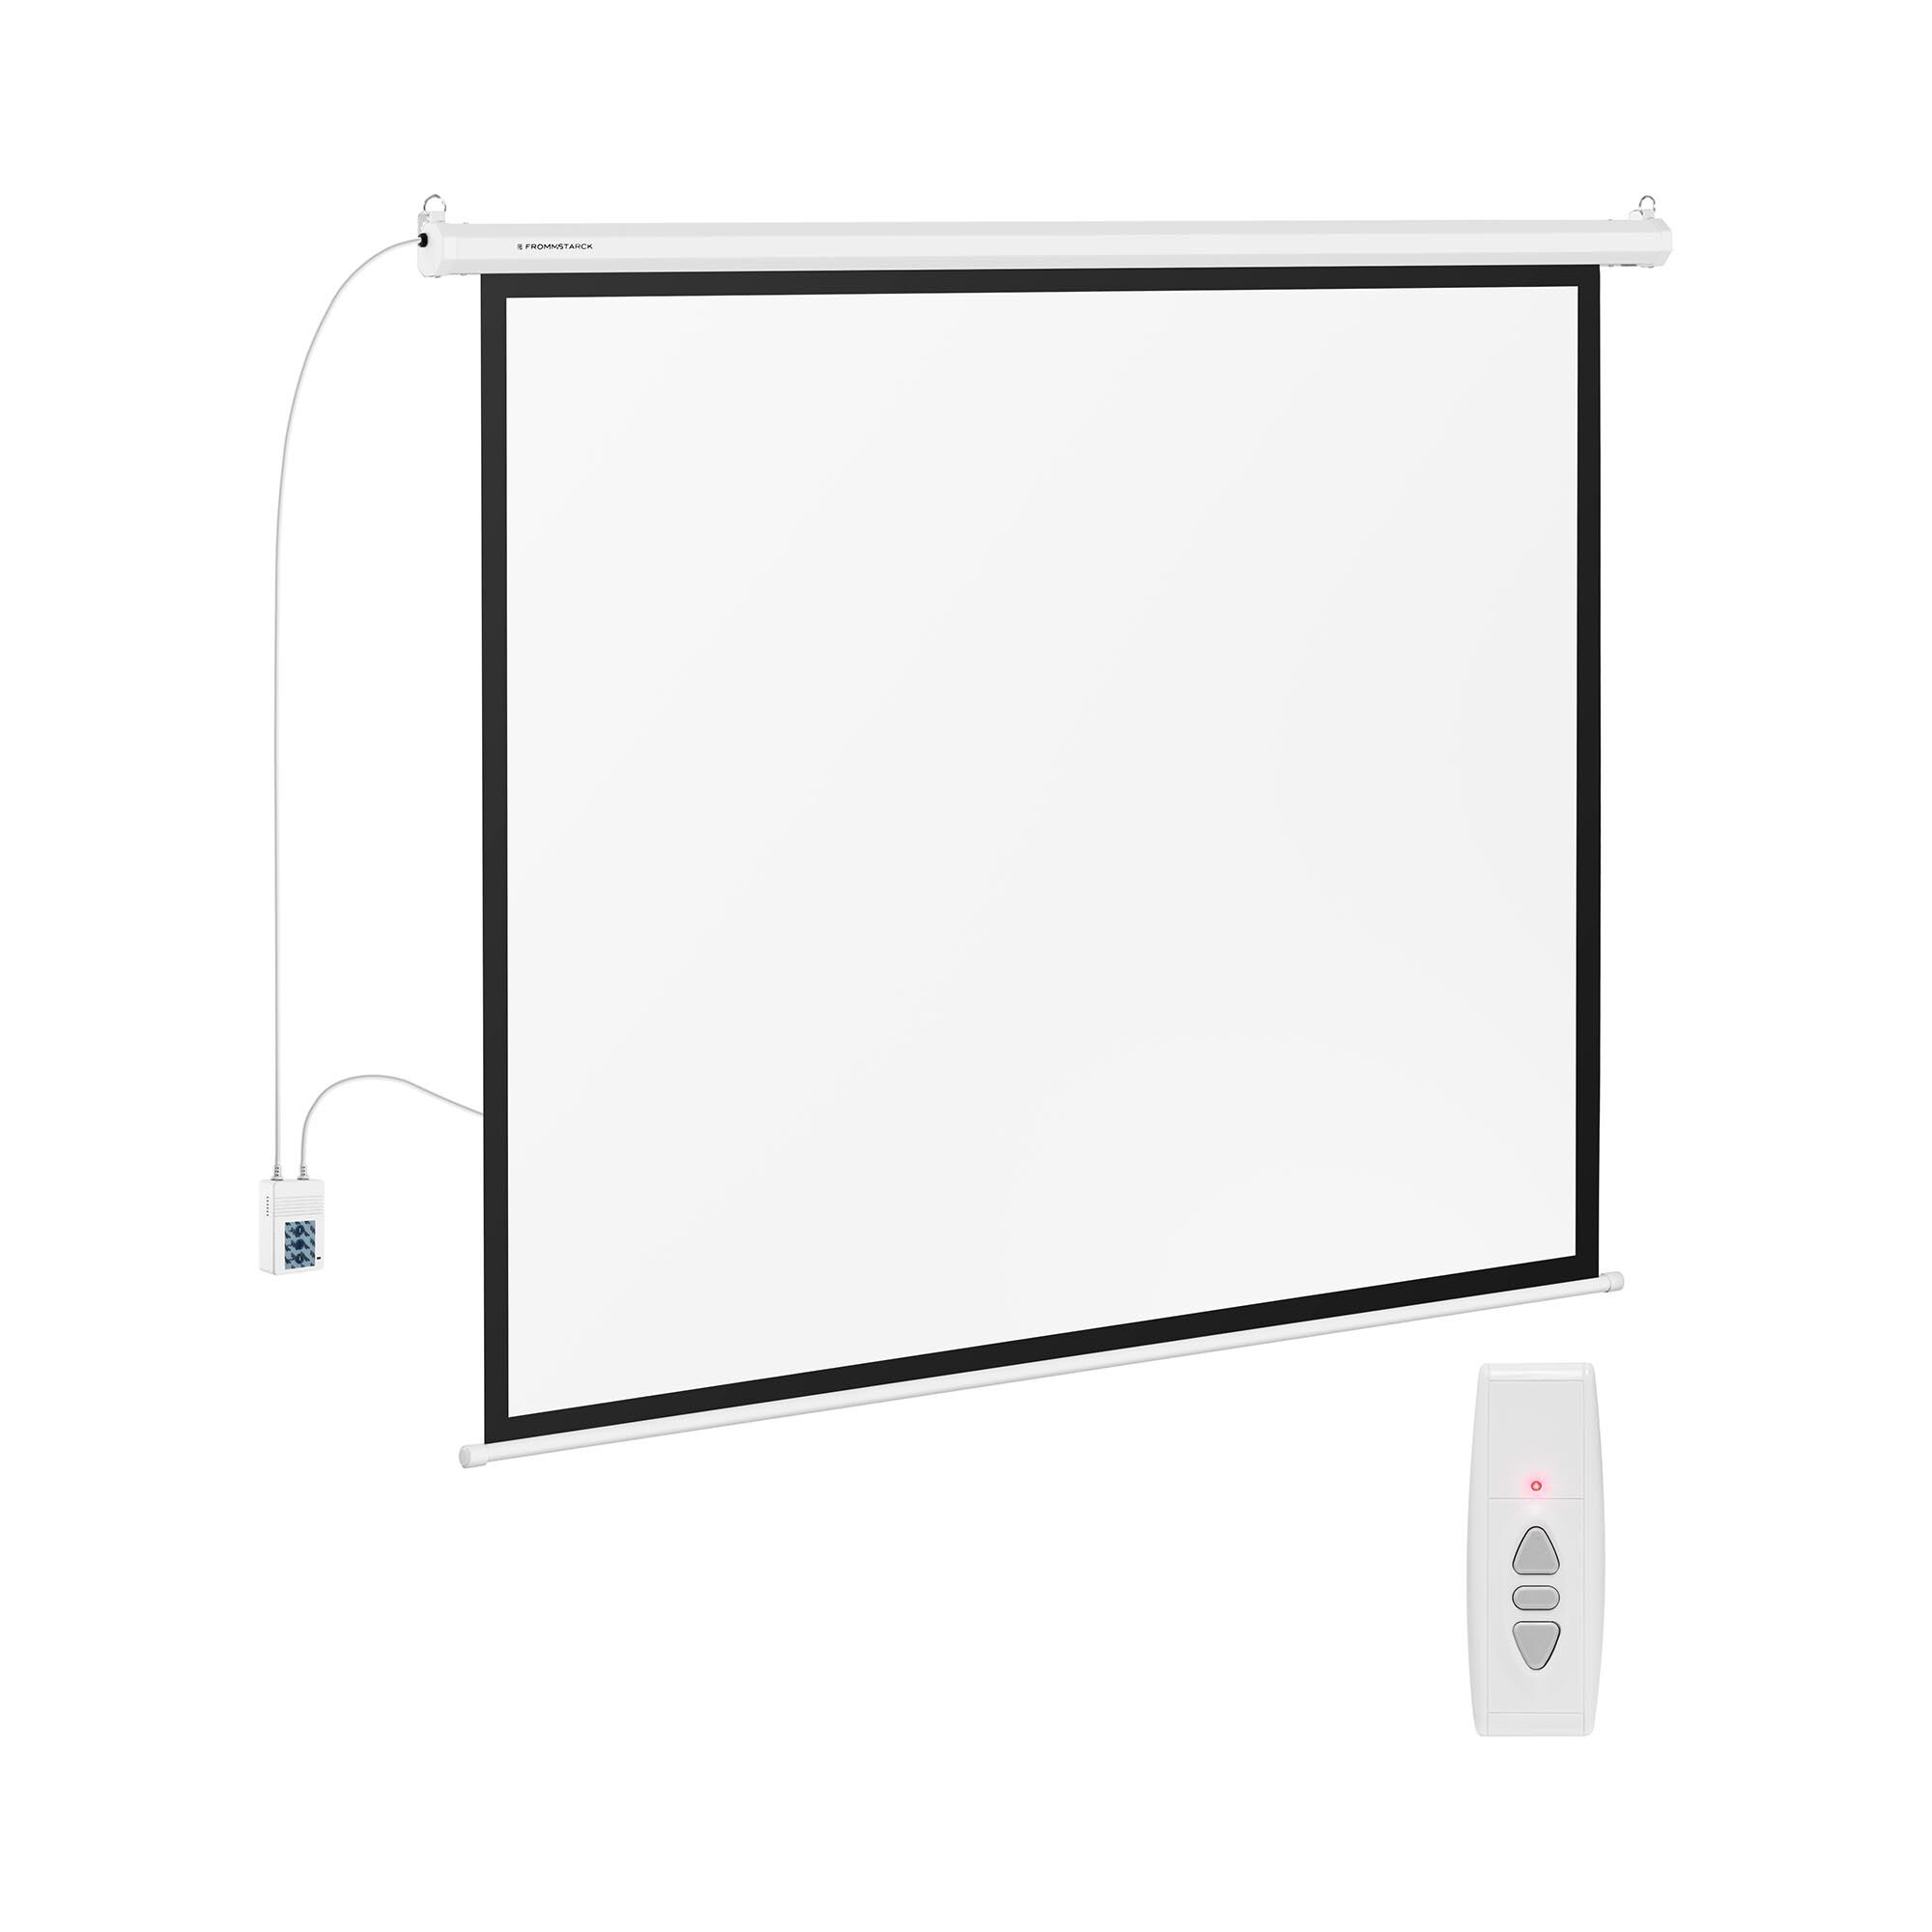 Fromm & Starck Projection Screen - 177 x 134 cm - 4:3